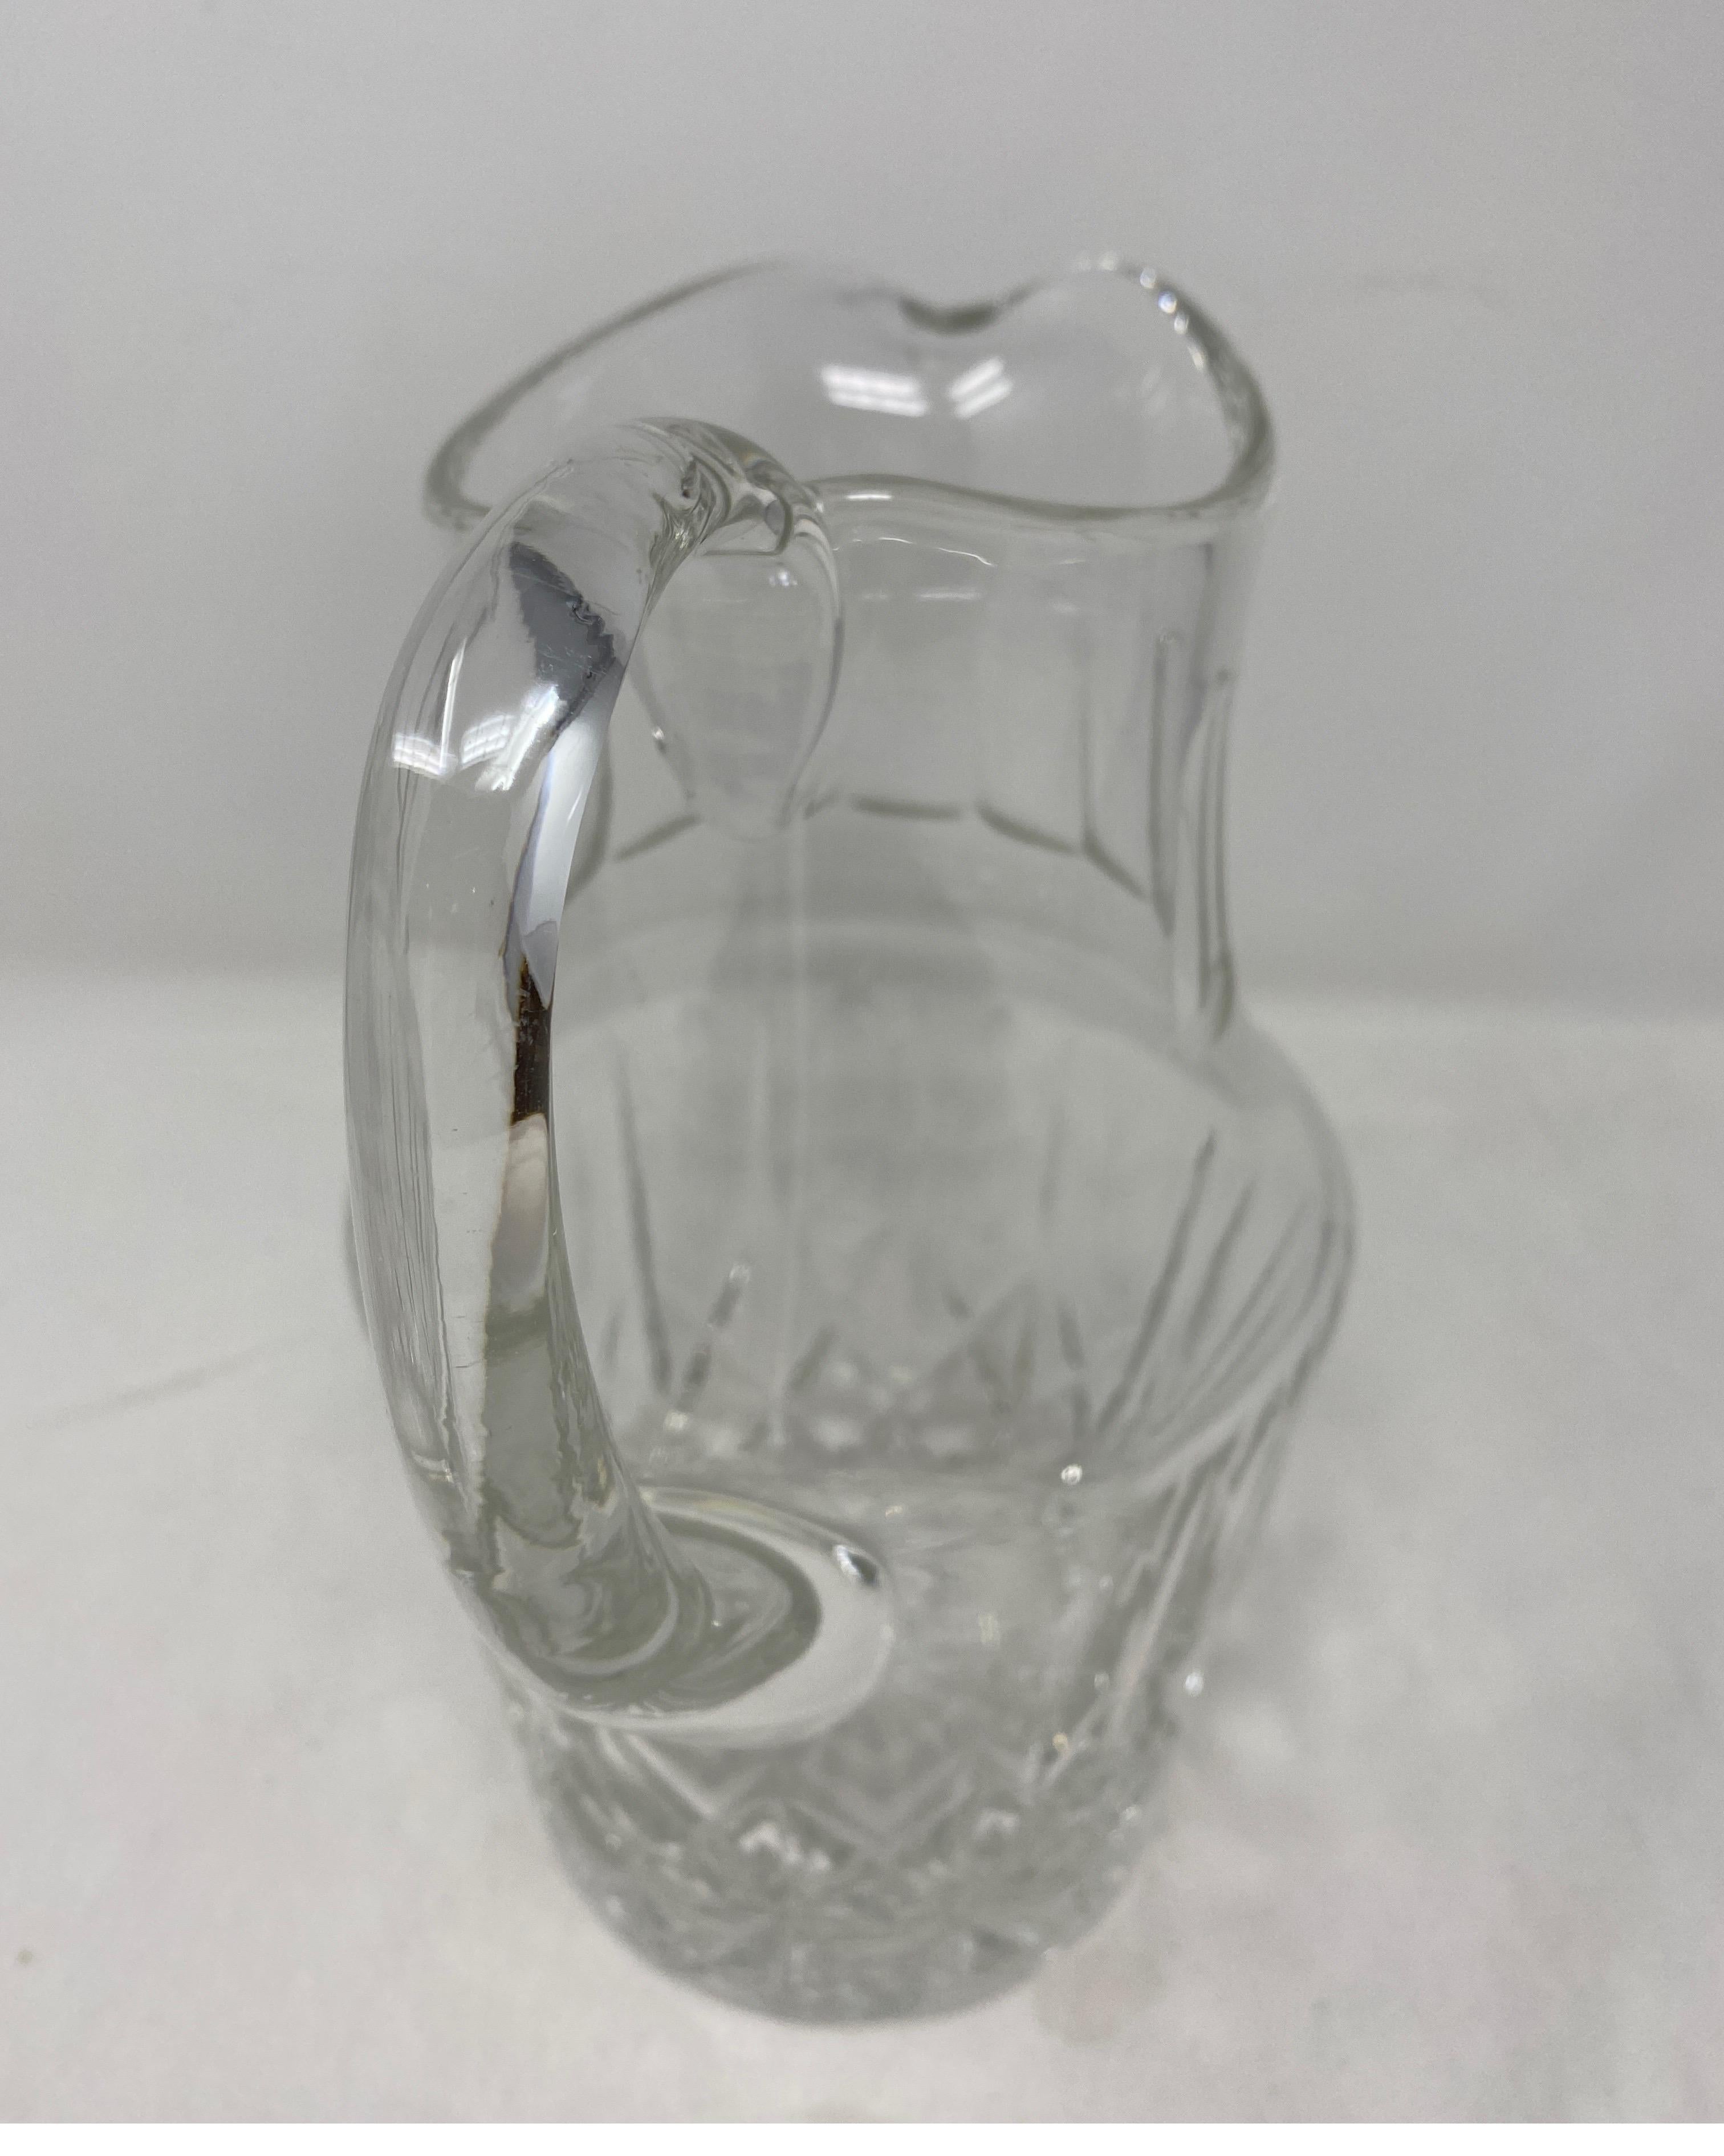 Antique crystal pitcher. 19th century.
7